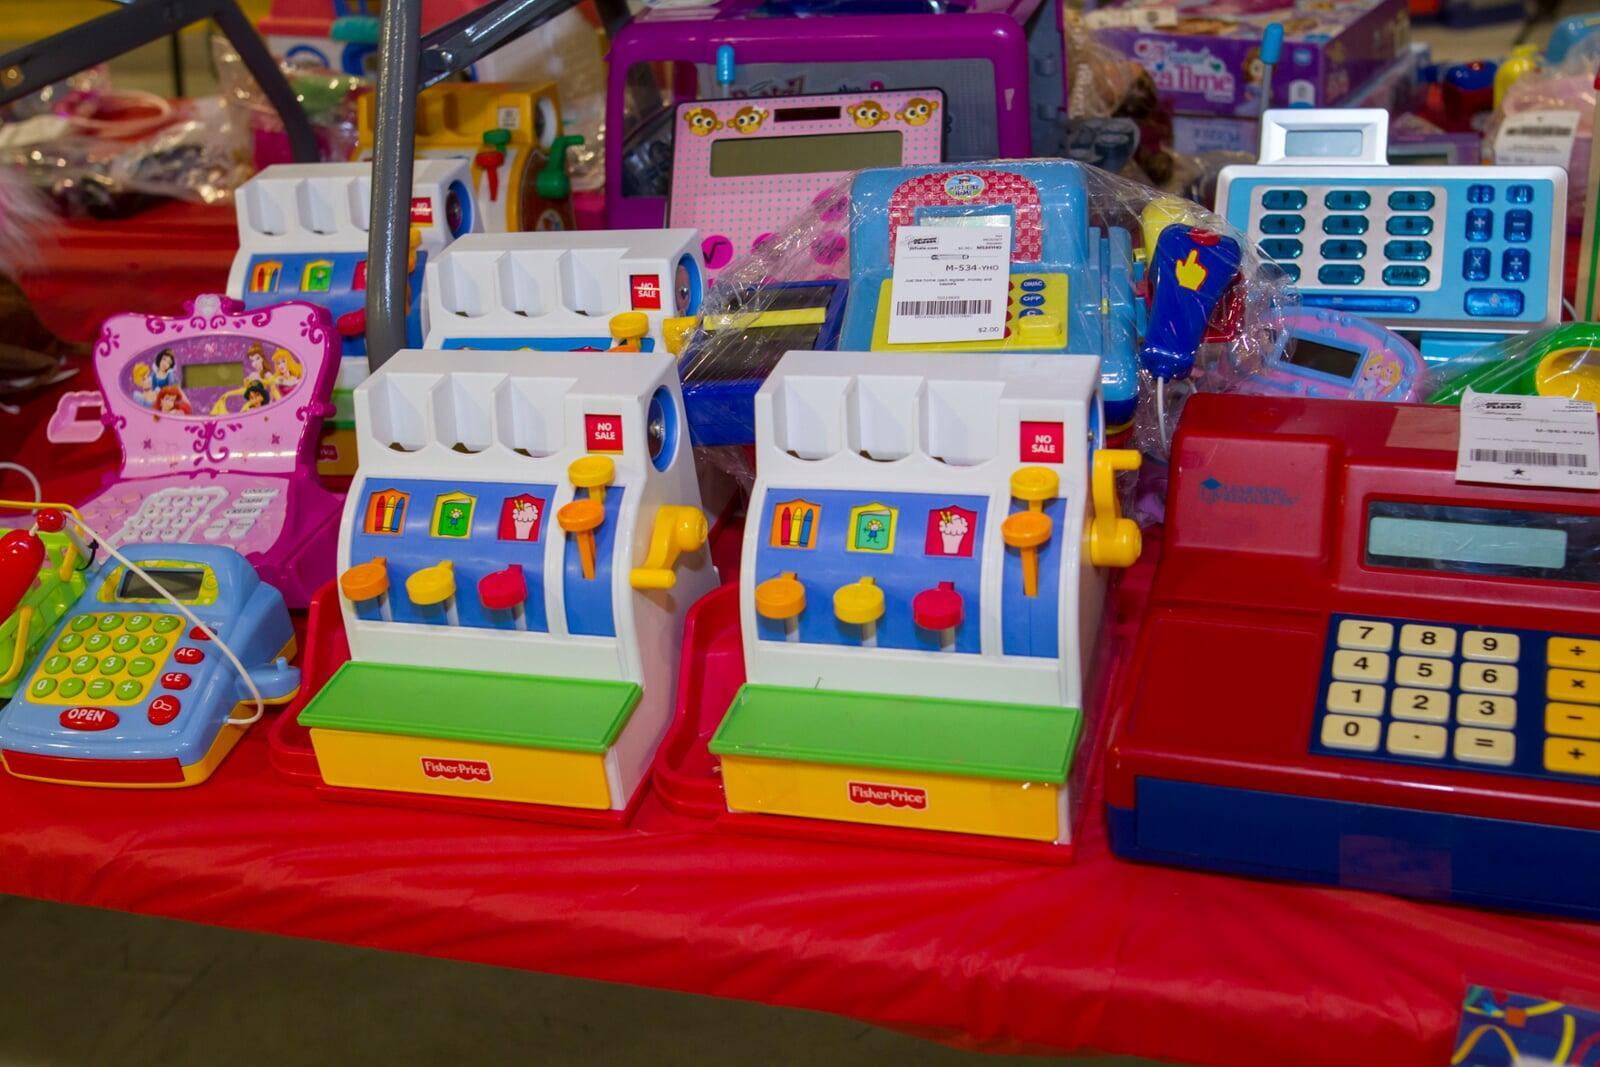 Toy cash registers on a table